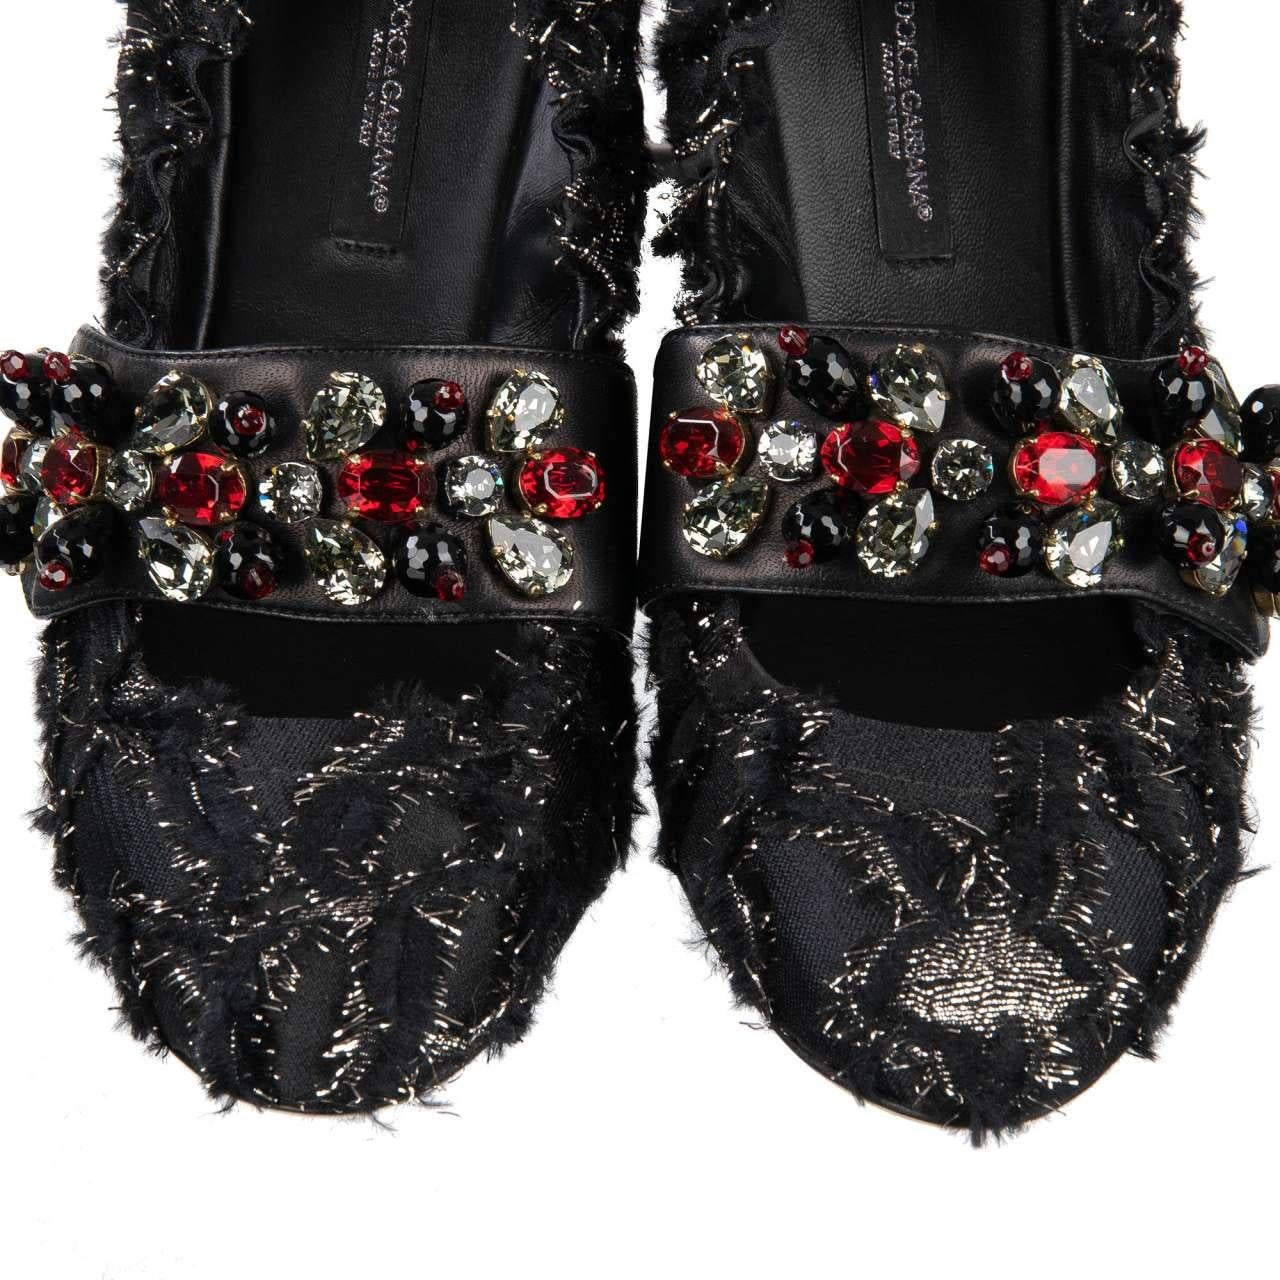 Dolce & Gabbana - Brocade Ballet Flats VALLY with Crystals EUR 38 For Sale 3